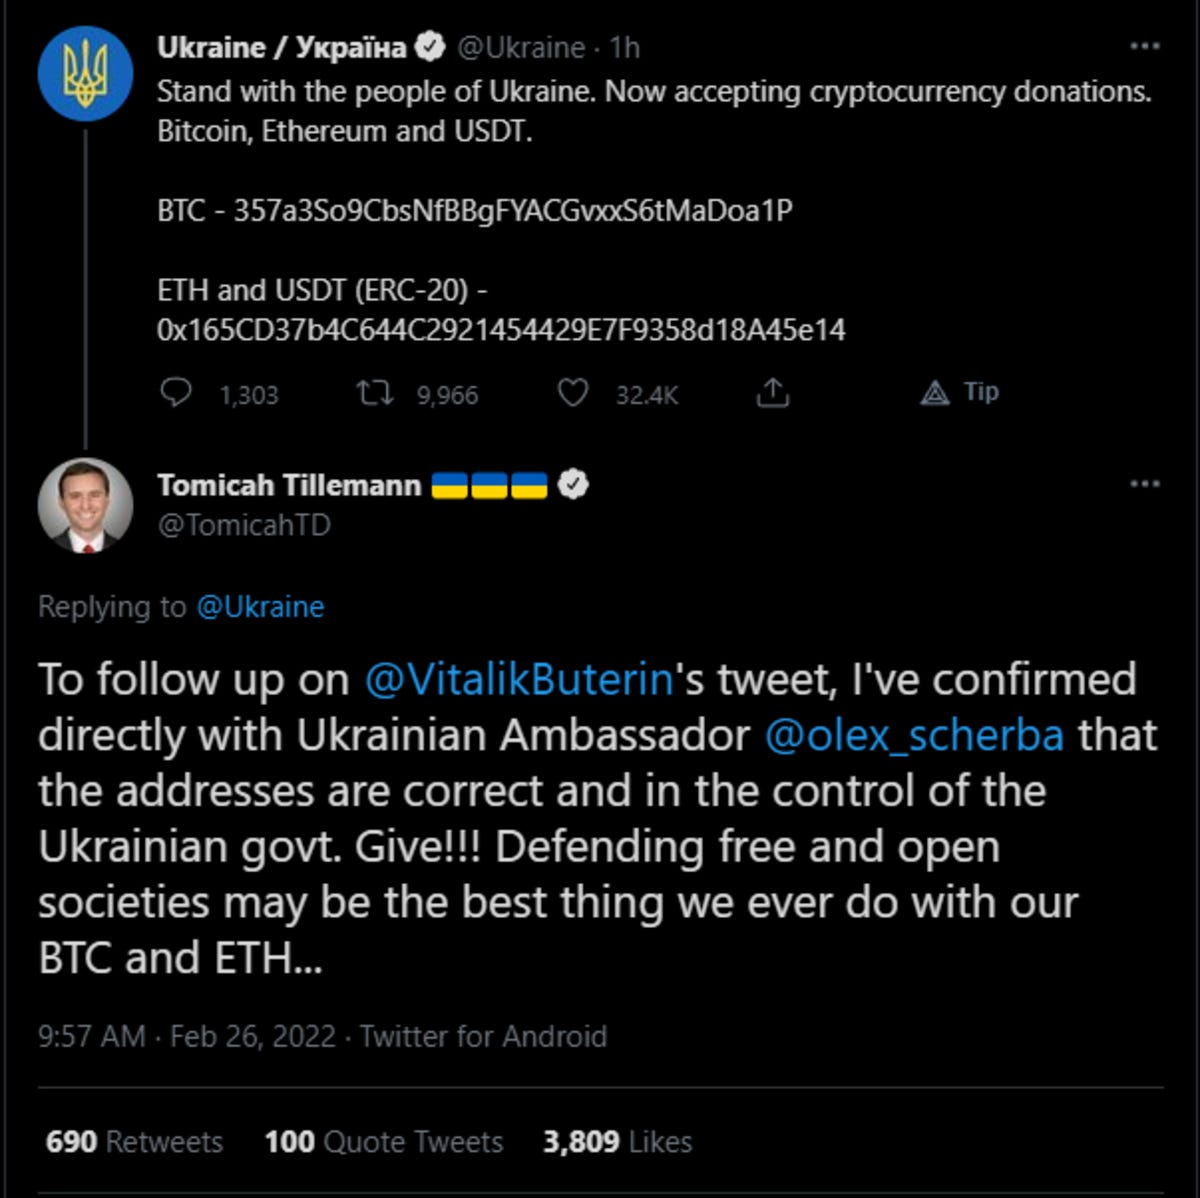 As the conflict between Ukraine and Russia propels social media reports and donations made in bitcoin, it underscores our decentralizing world.